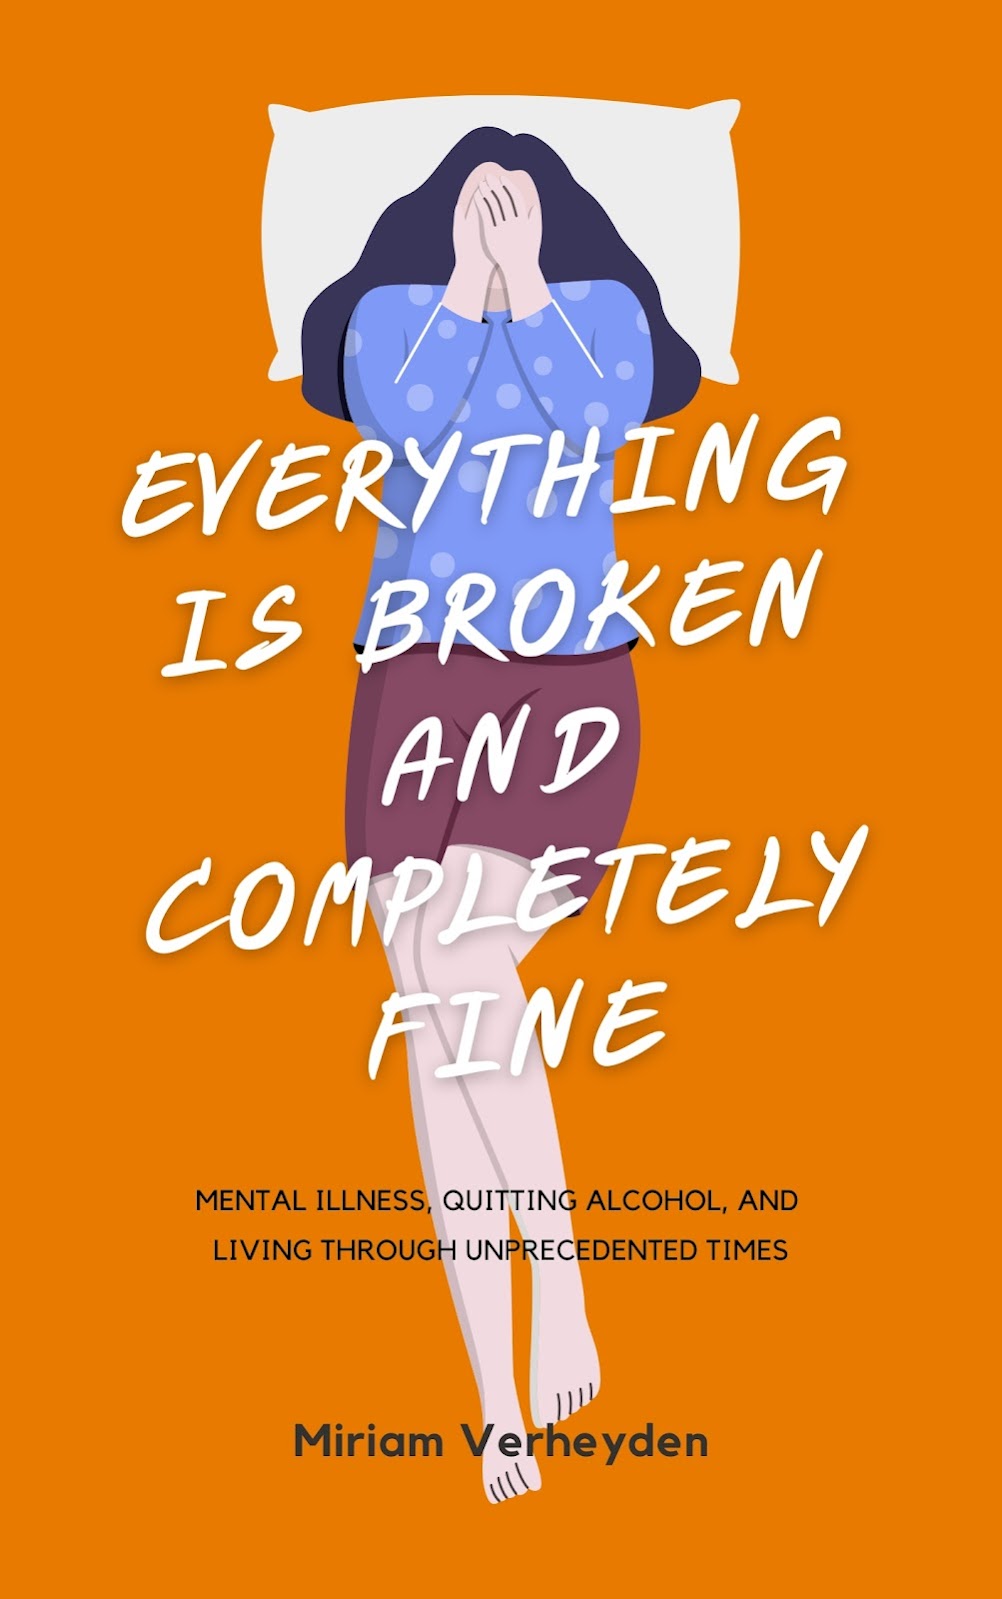 My new book: living with mental illness and grey area drinking